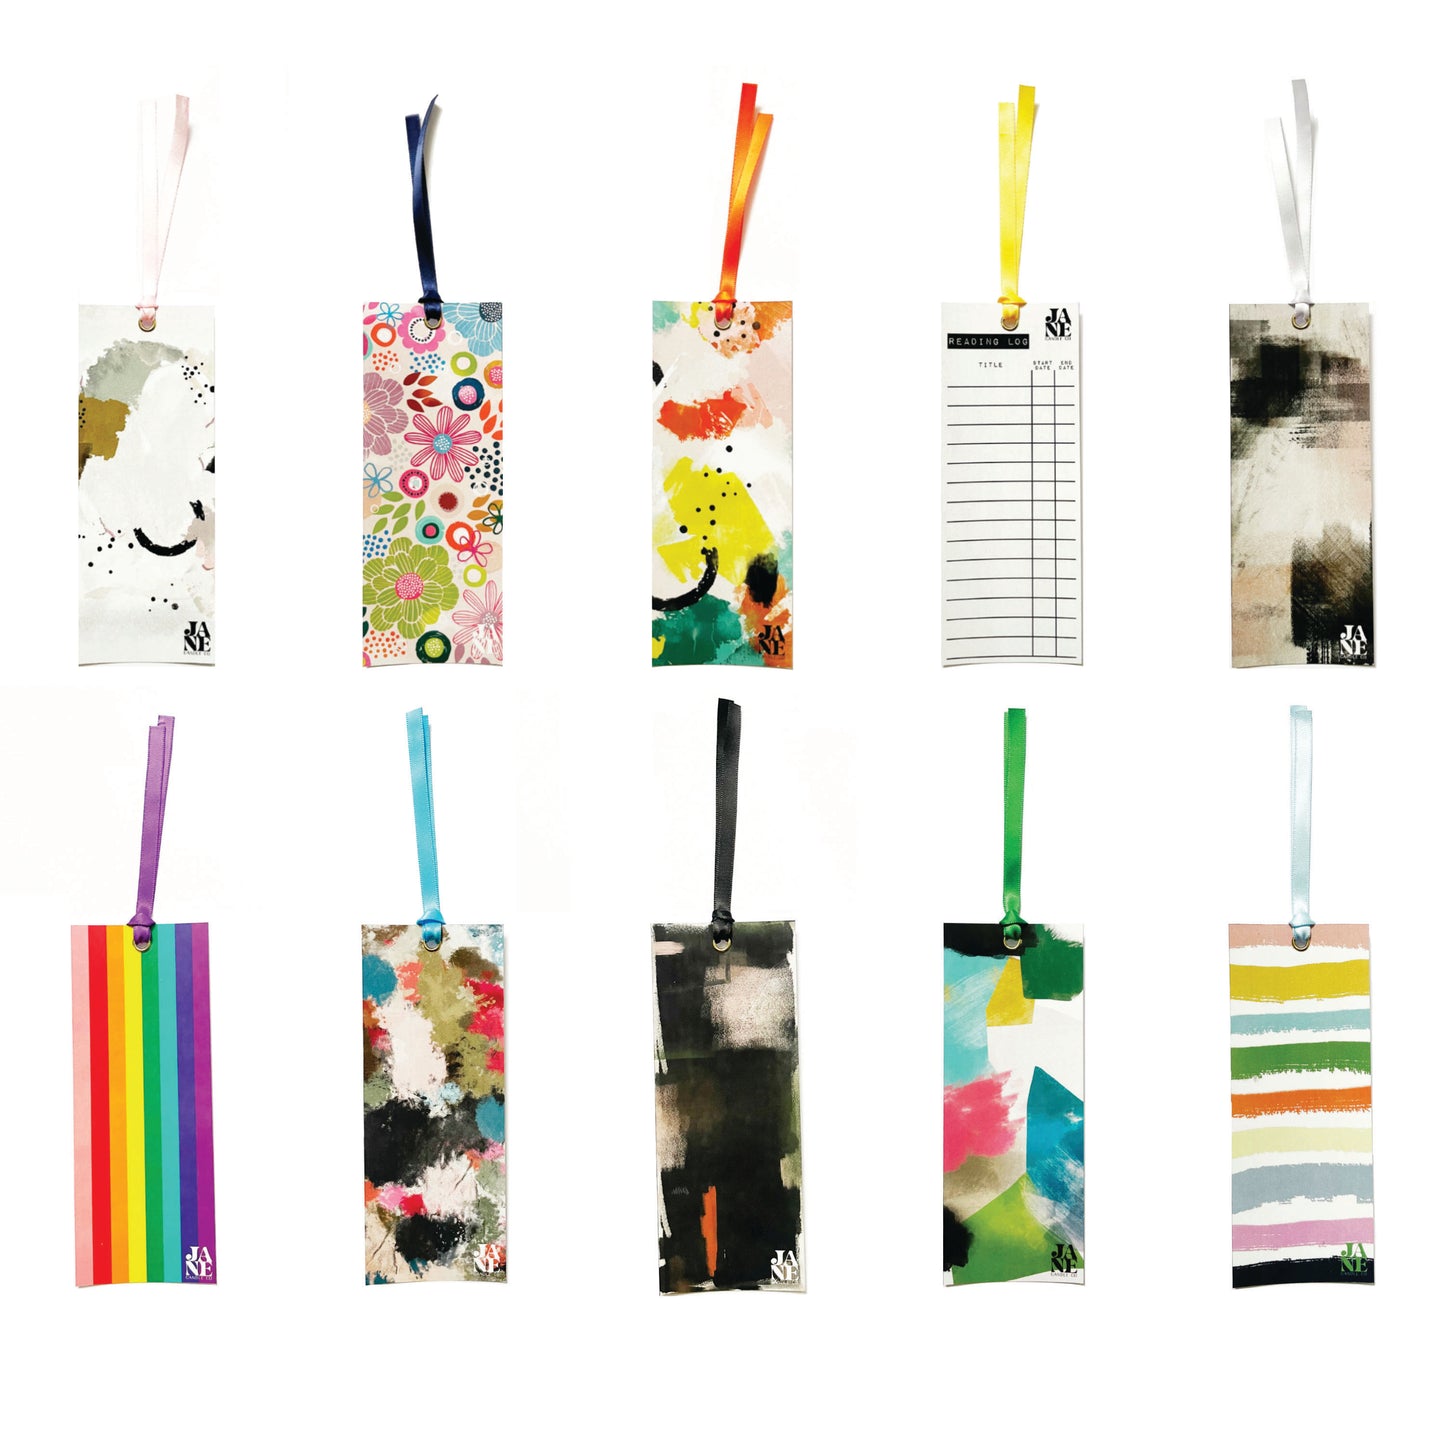 Jane Candle bookmarks